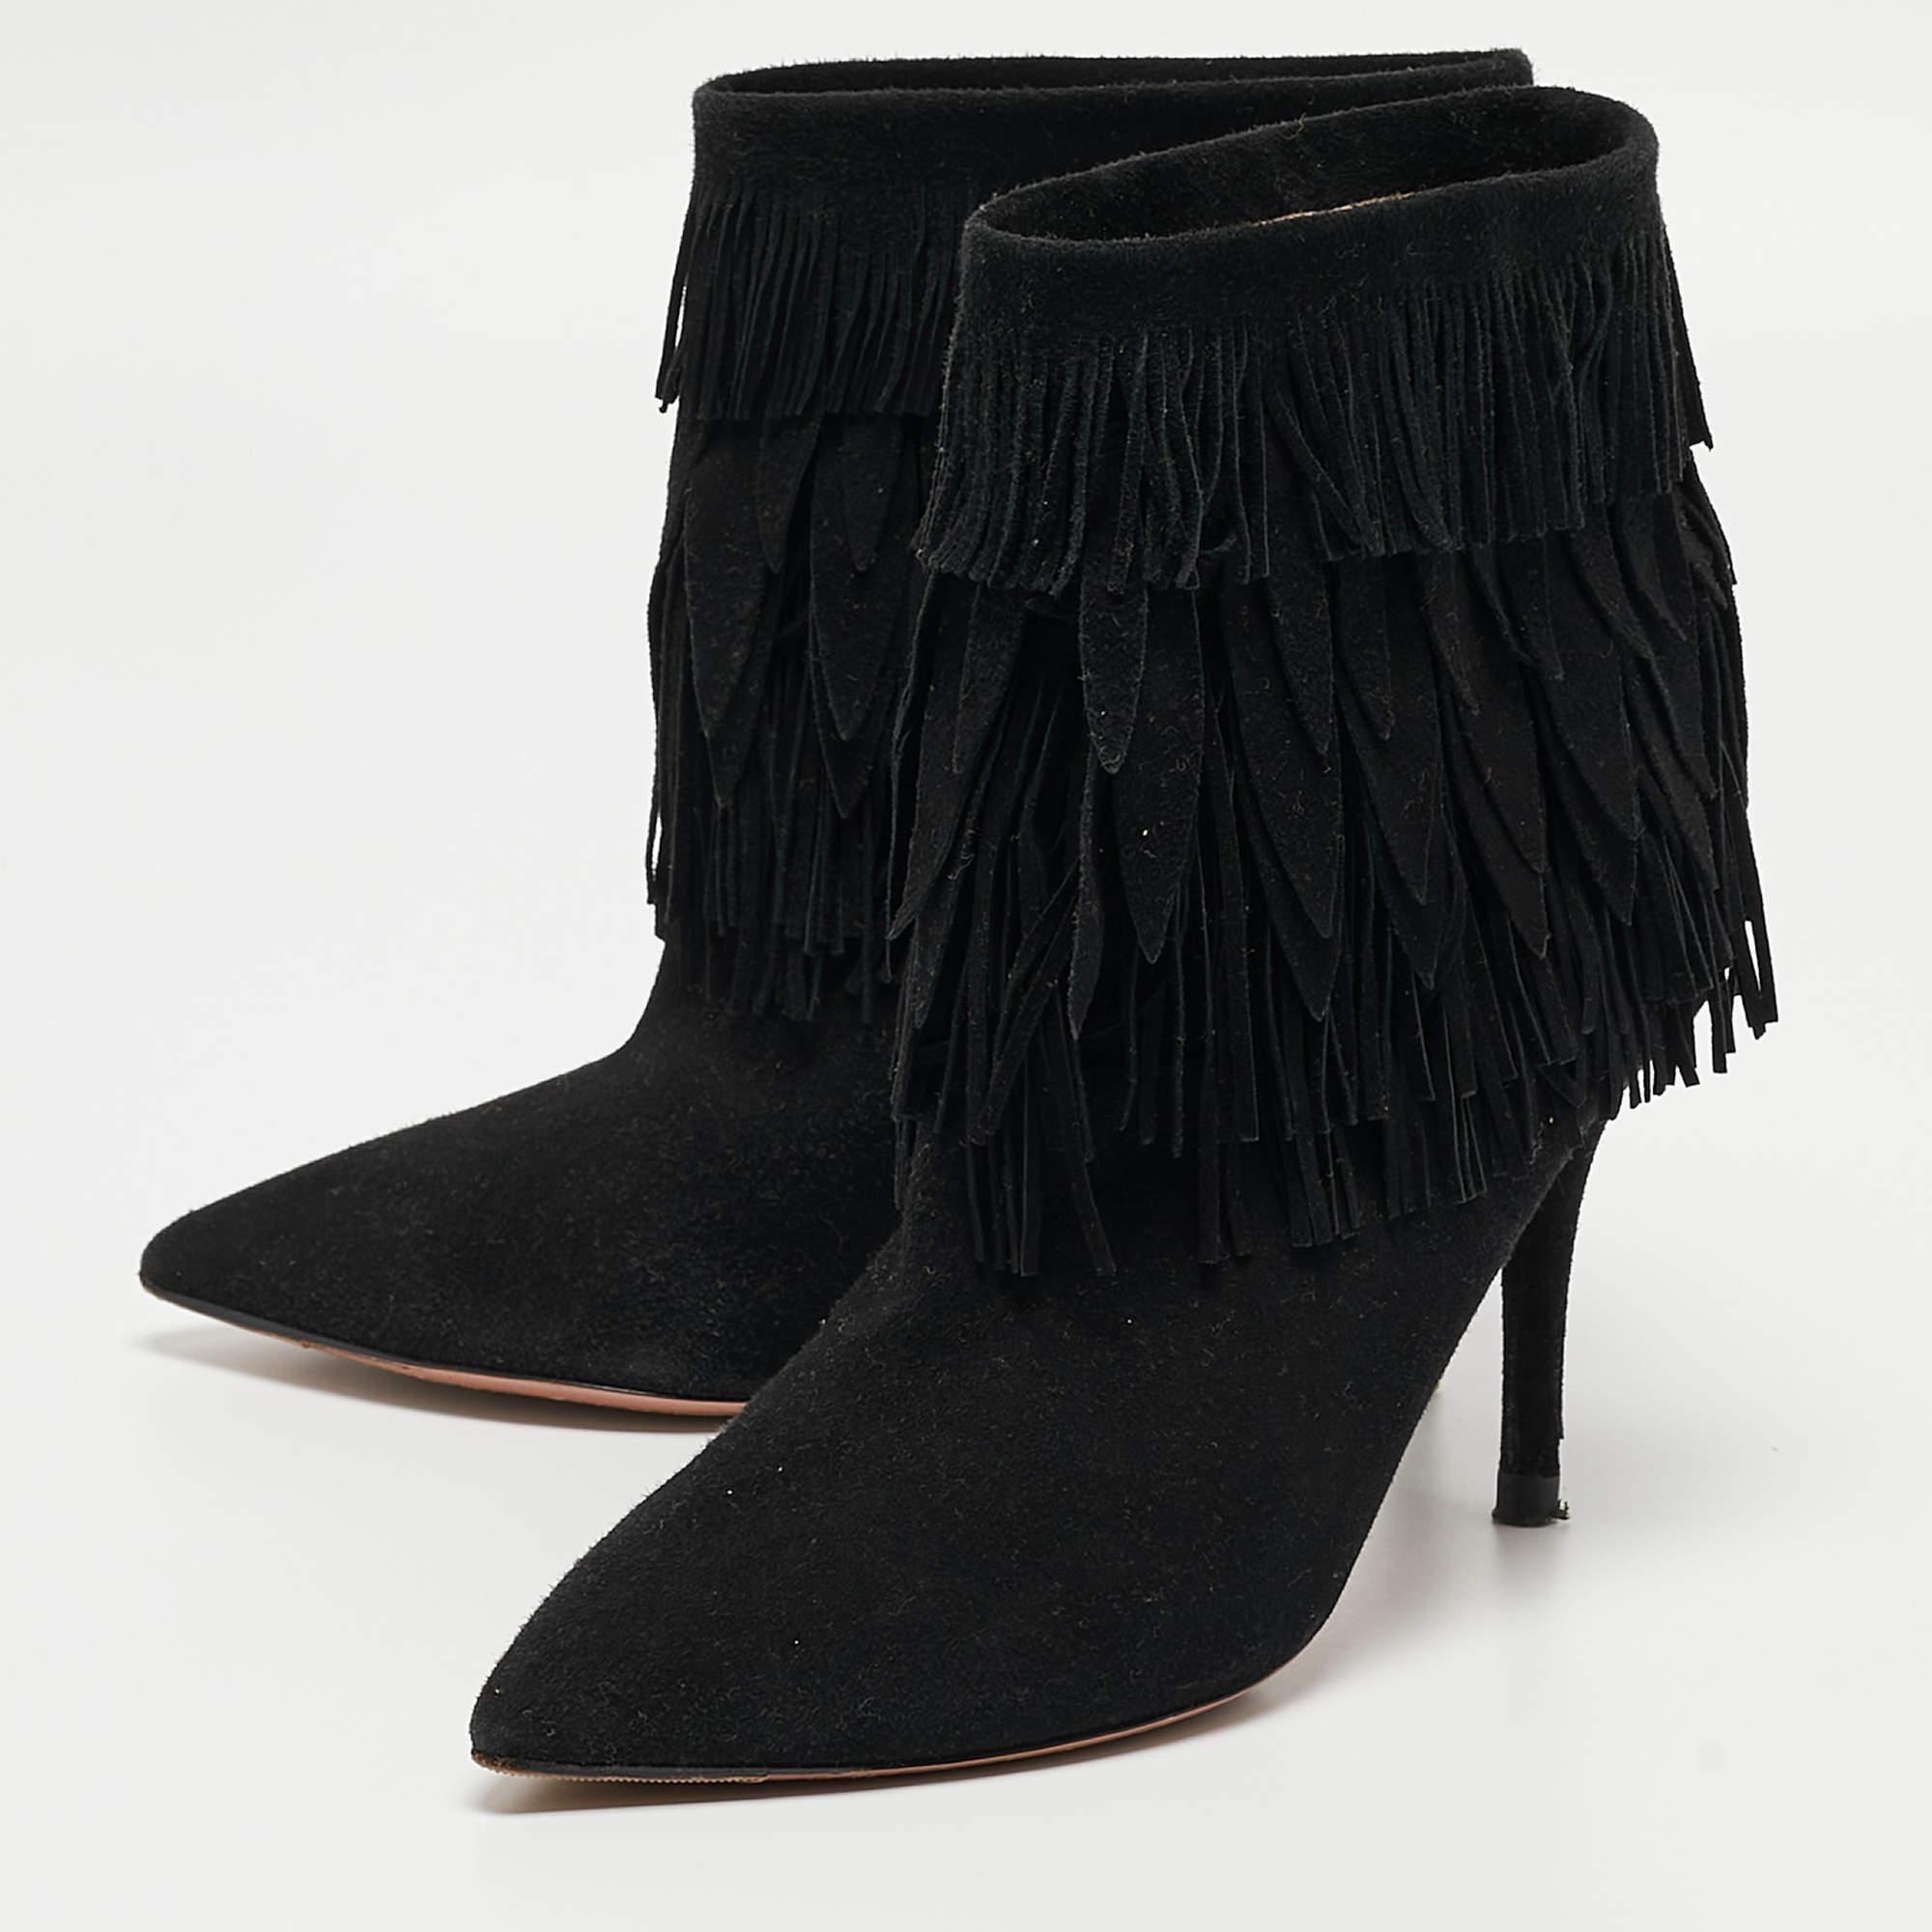 Aquazzura's classy take on footwear is captured in this design. The booties are wonderfully crafted using high-quality materials and set on durable soles. Wear yours with cropped hemlines to spotlight the modern construction.

